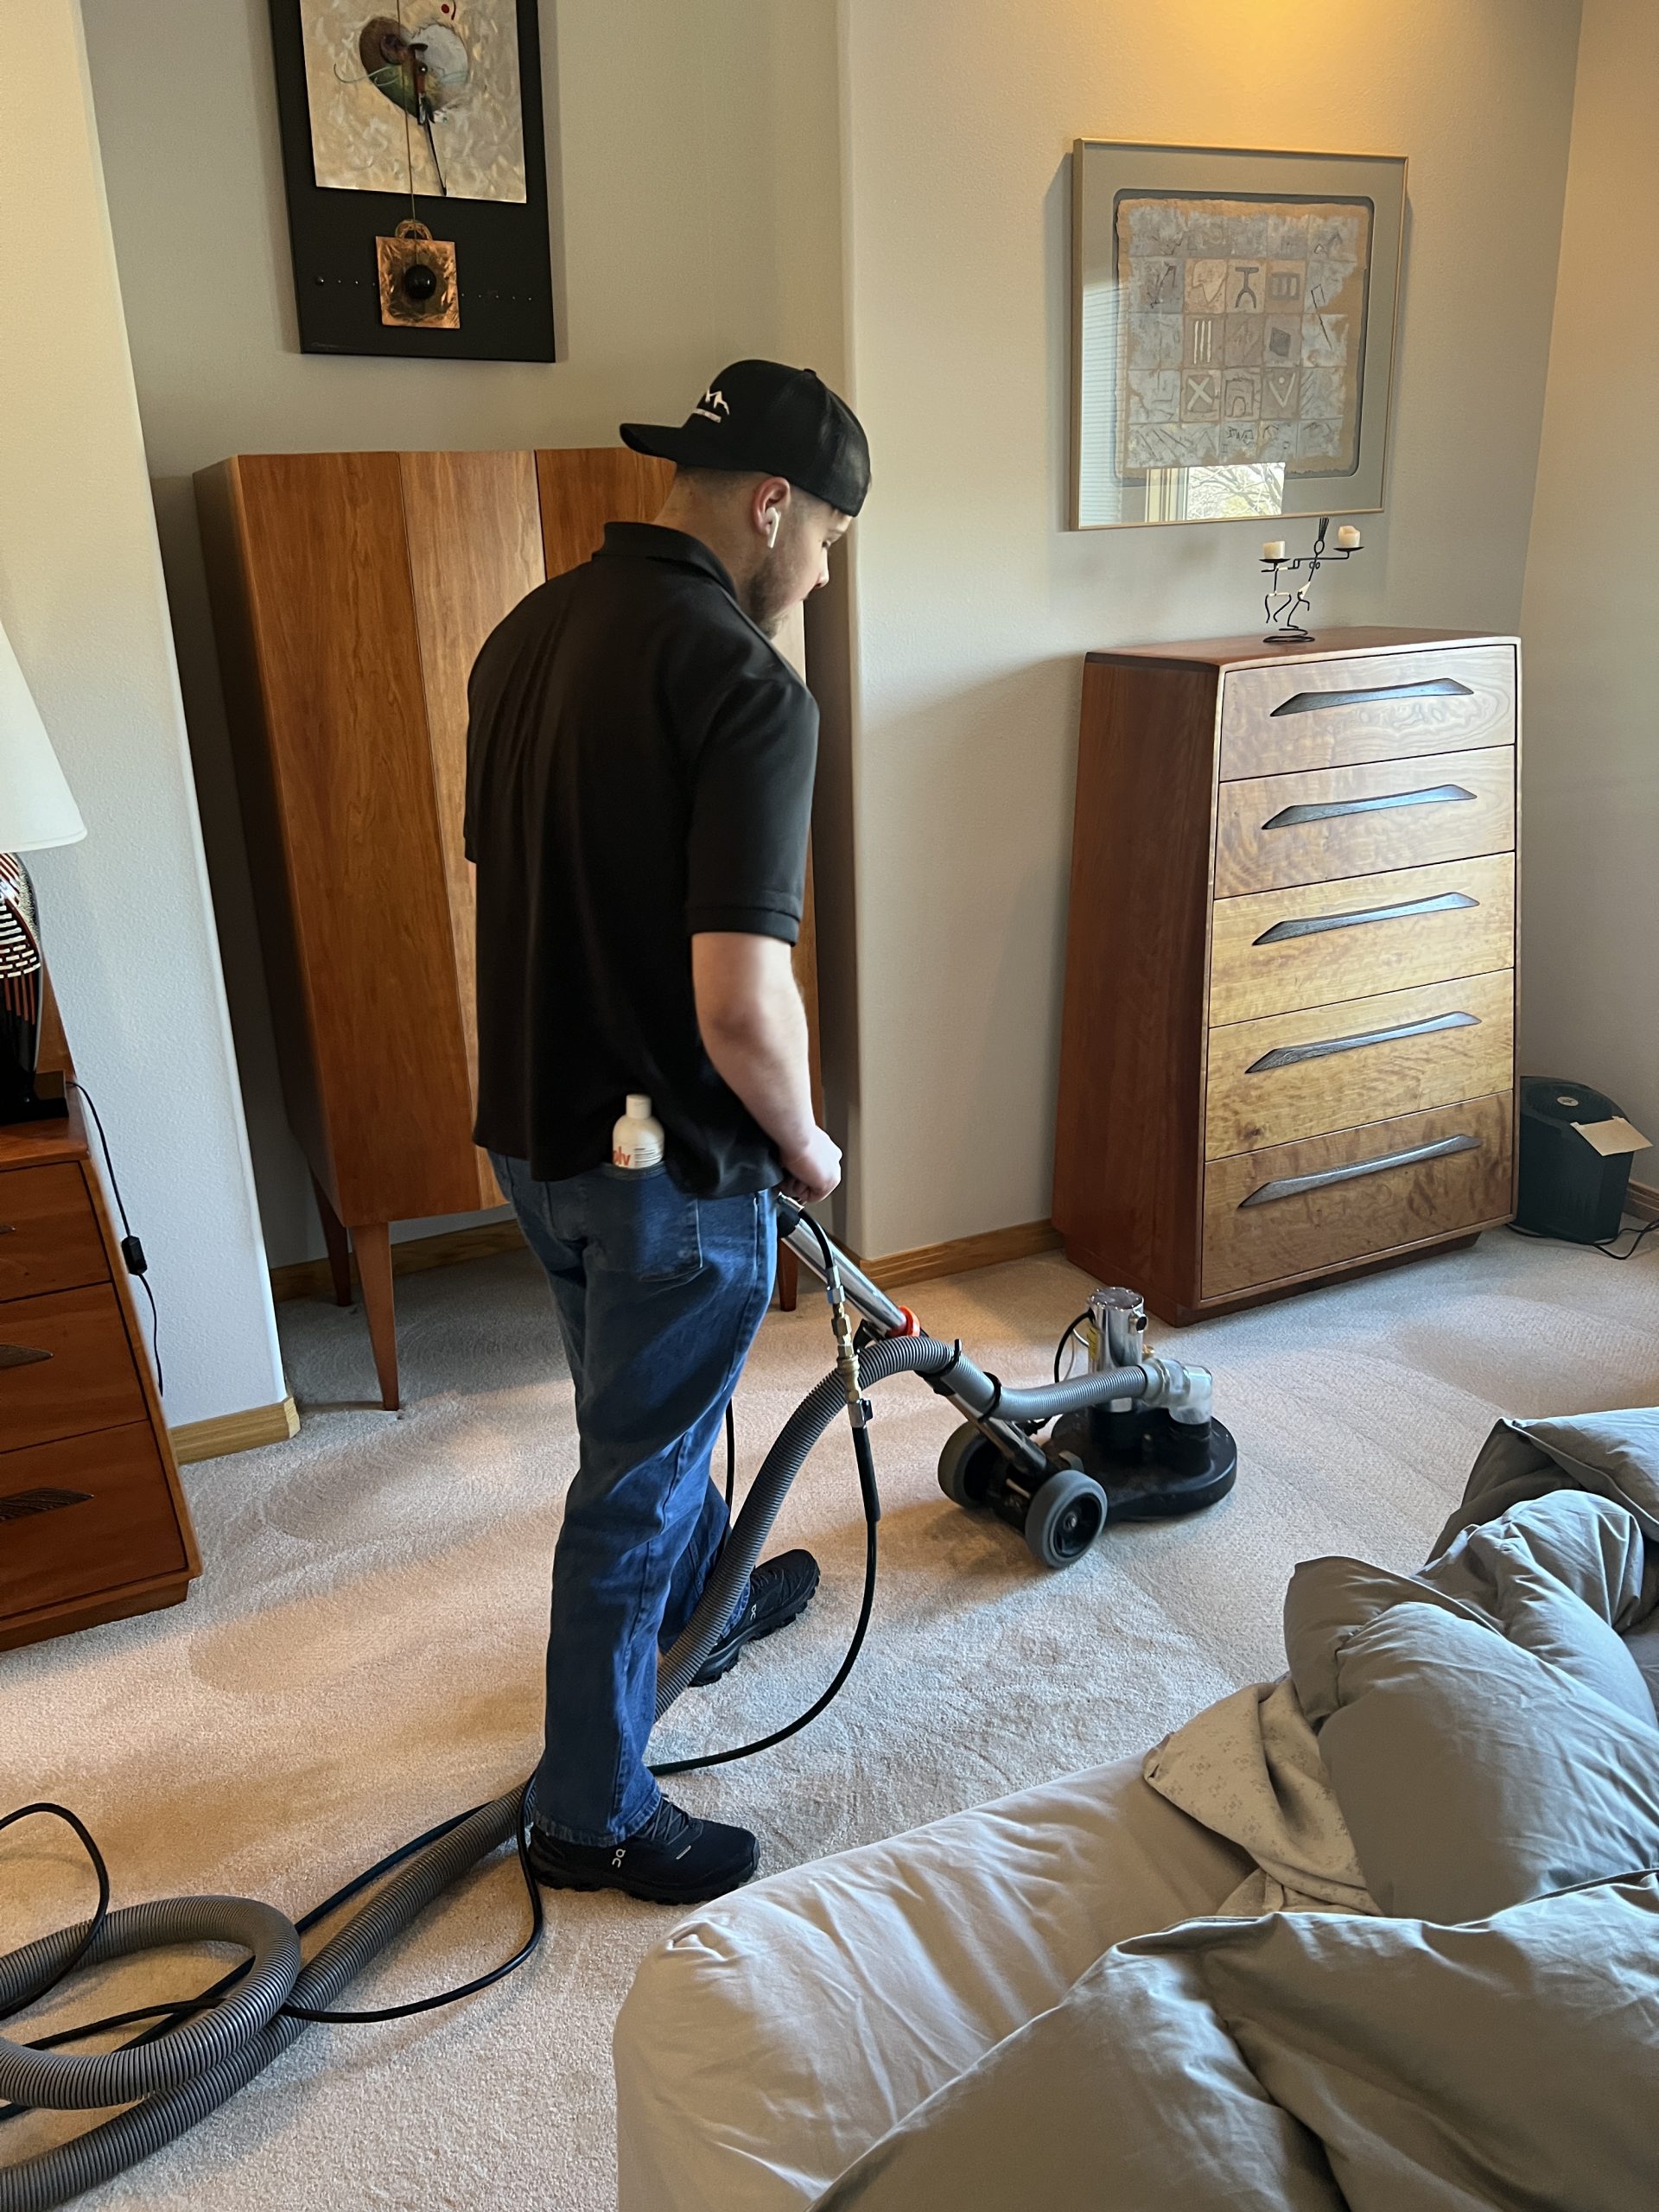 Colorado Carpet Masters is carpet cleaning in Firestone CO using the T-Rex power wand which scrubs the carpets from a multitude of directions.